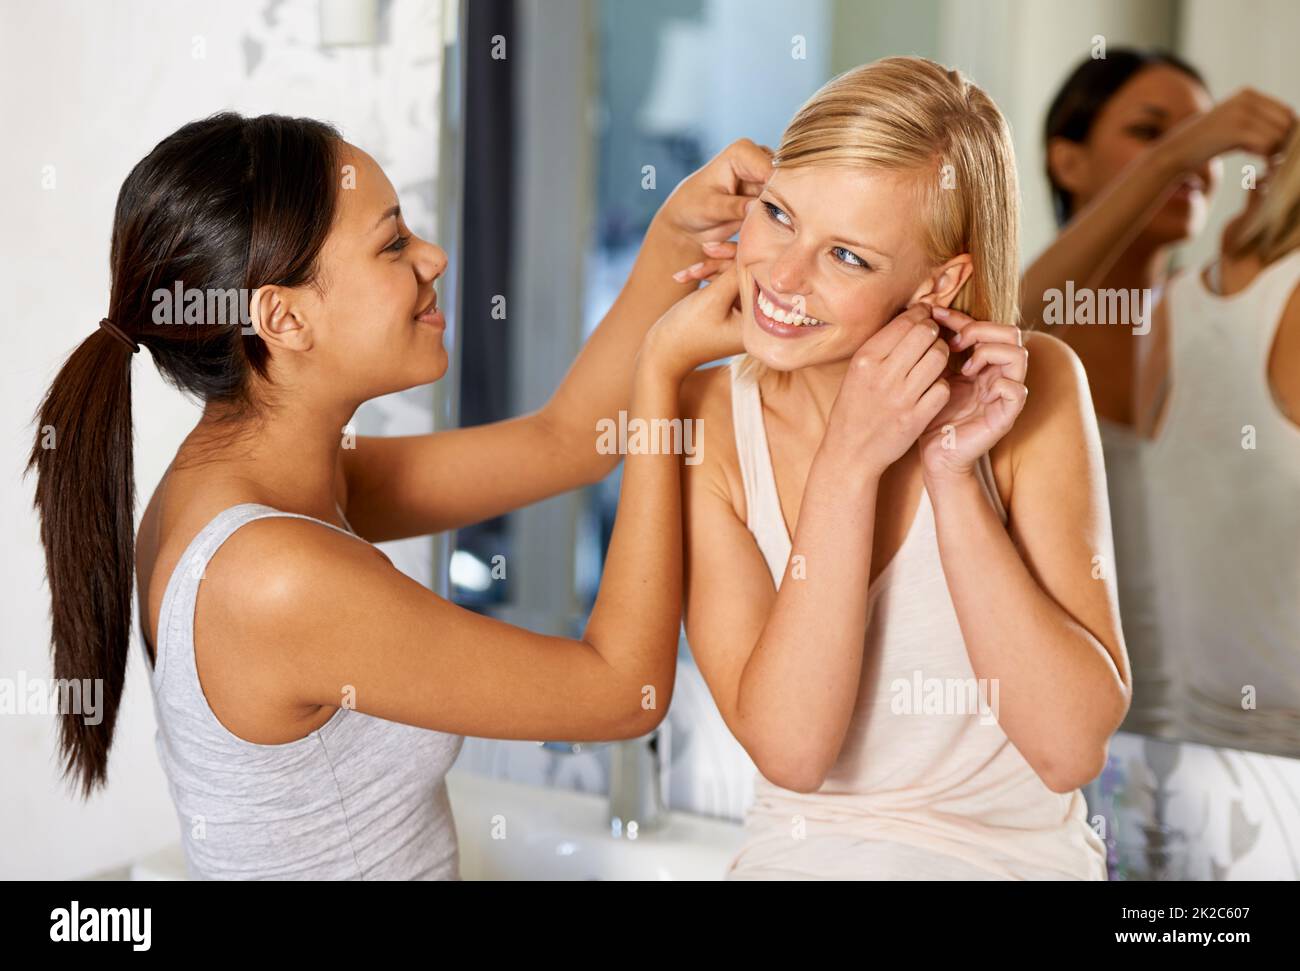 Putting on some sparklies. Shot of a young woman helping her friend to put her earrings in. Stock Photo